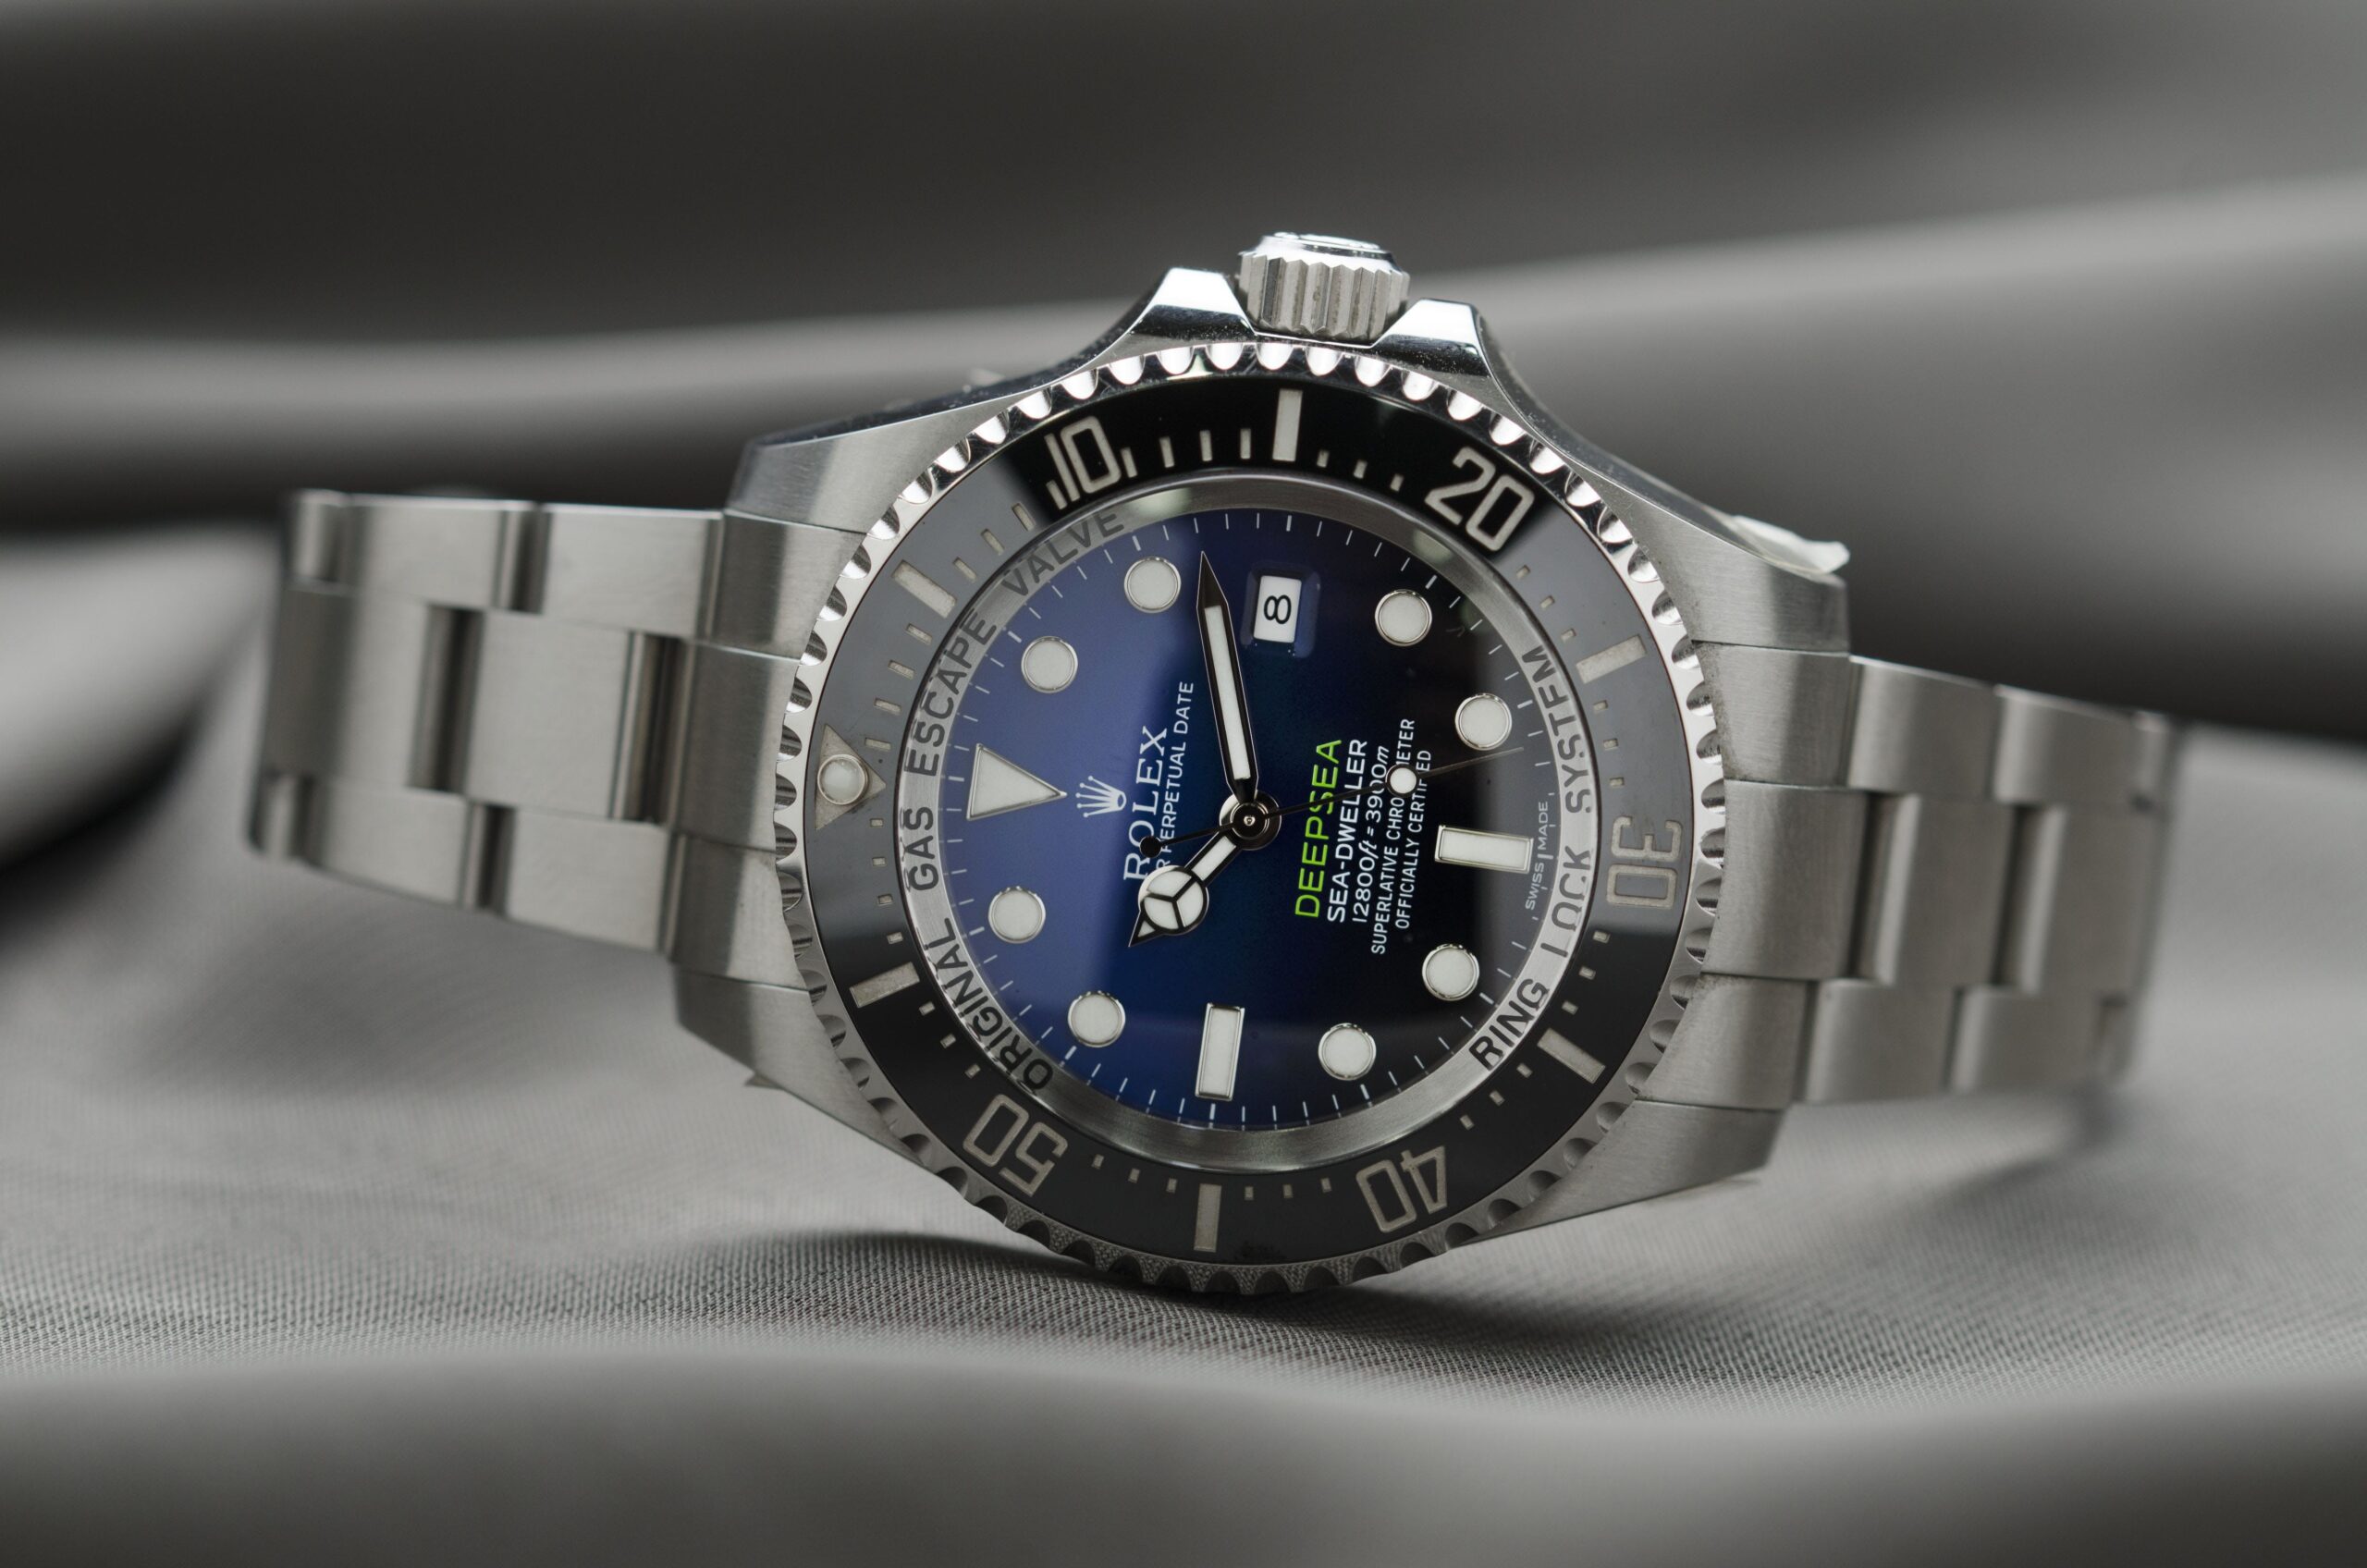 How To Sell a Rolex Watch with Papers The 3 Best Ways to Cash In